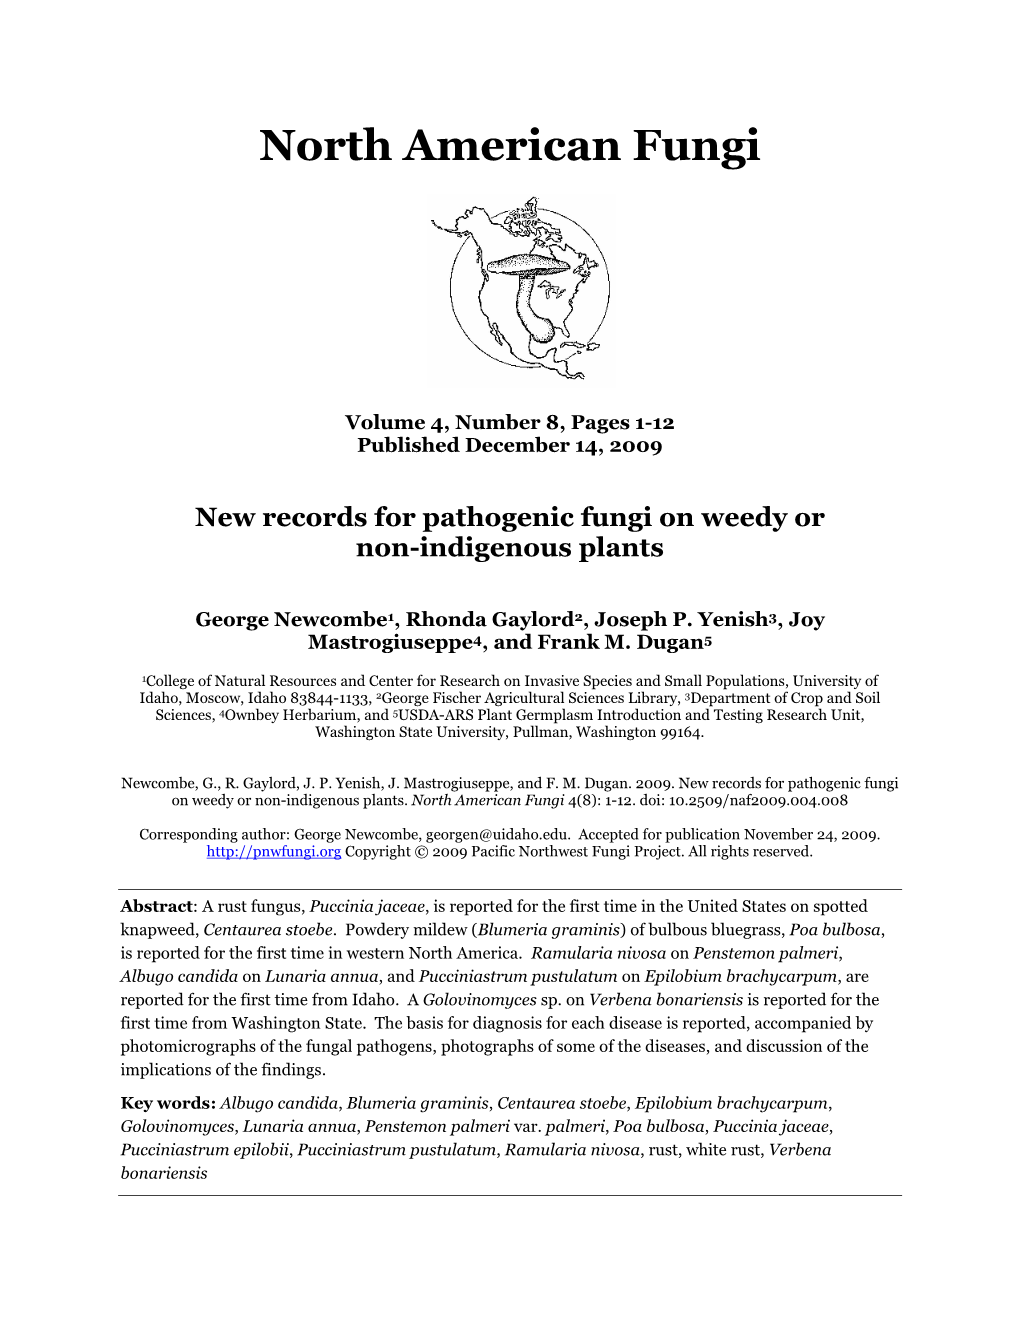 New Records for Pathogenic Fungi on Weedy Or Non-Indigenous Plants